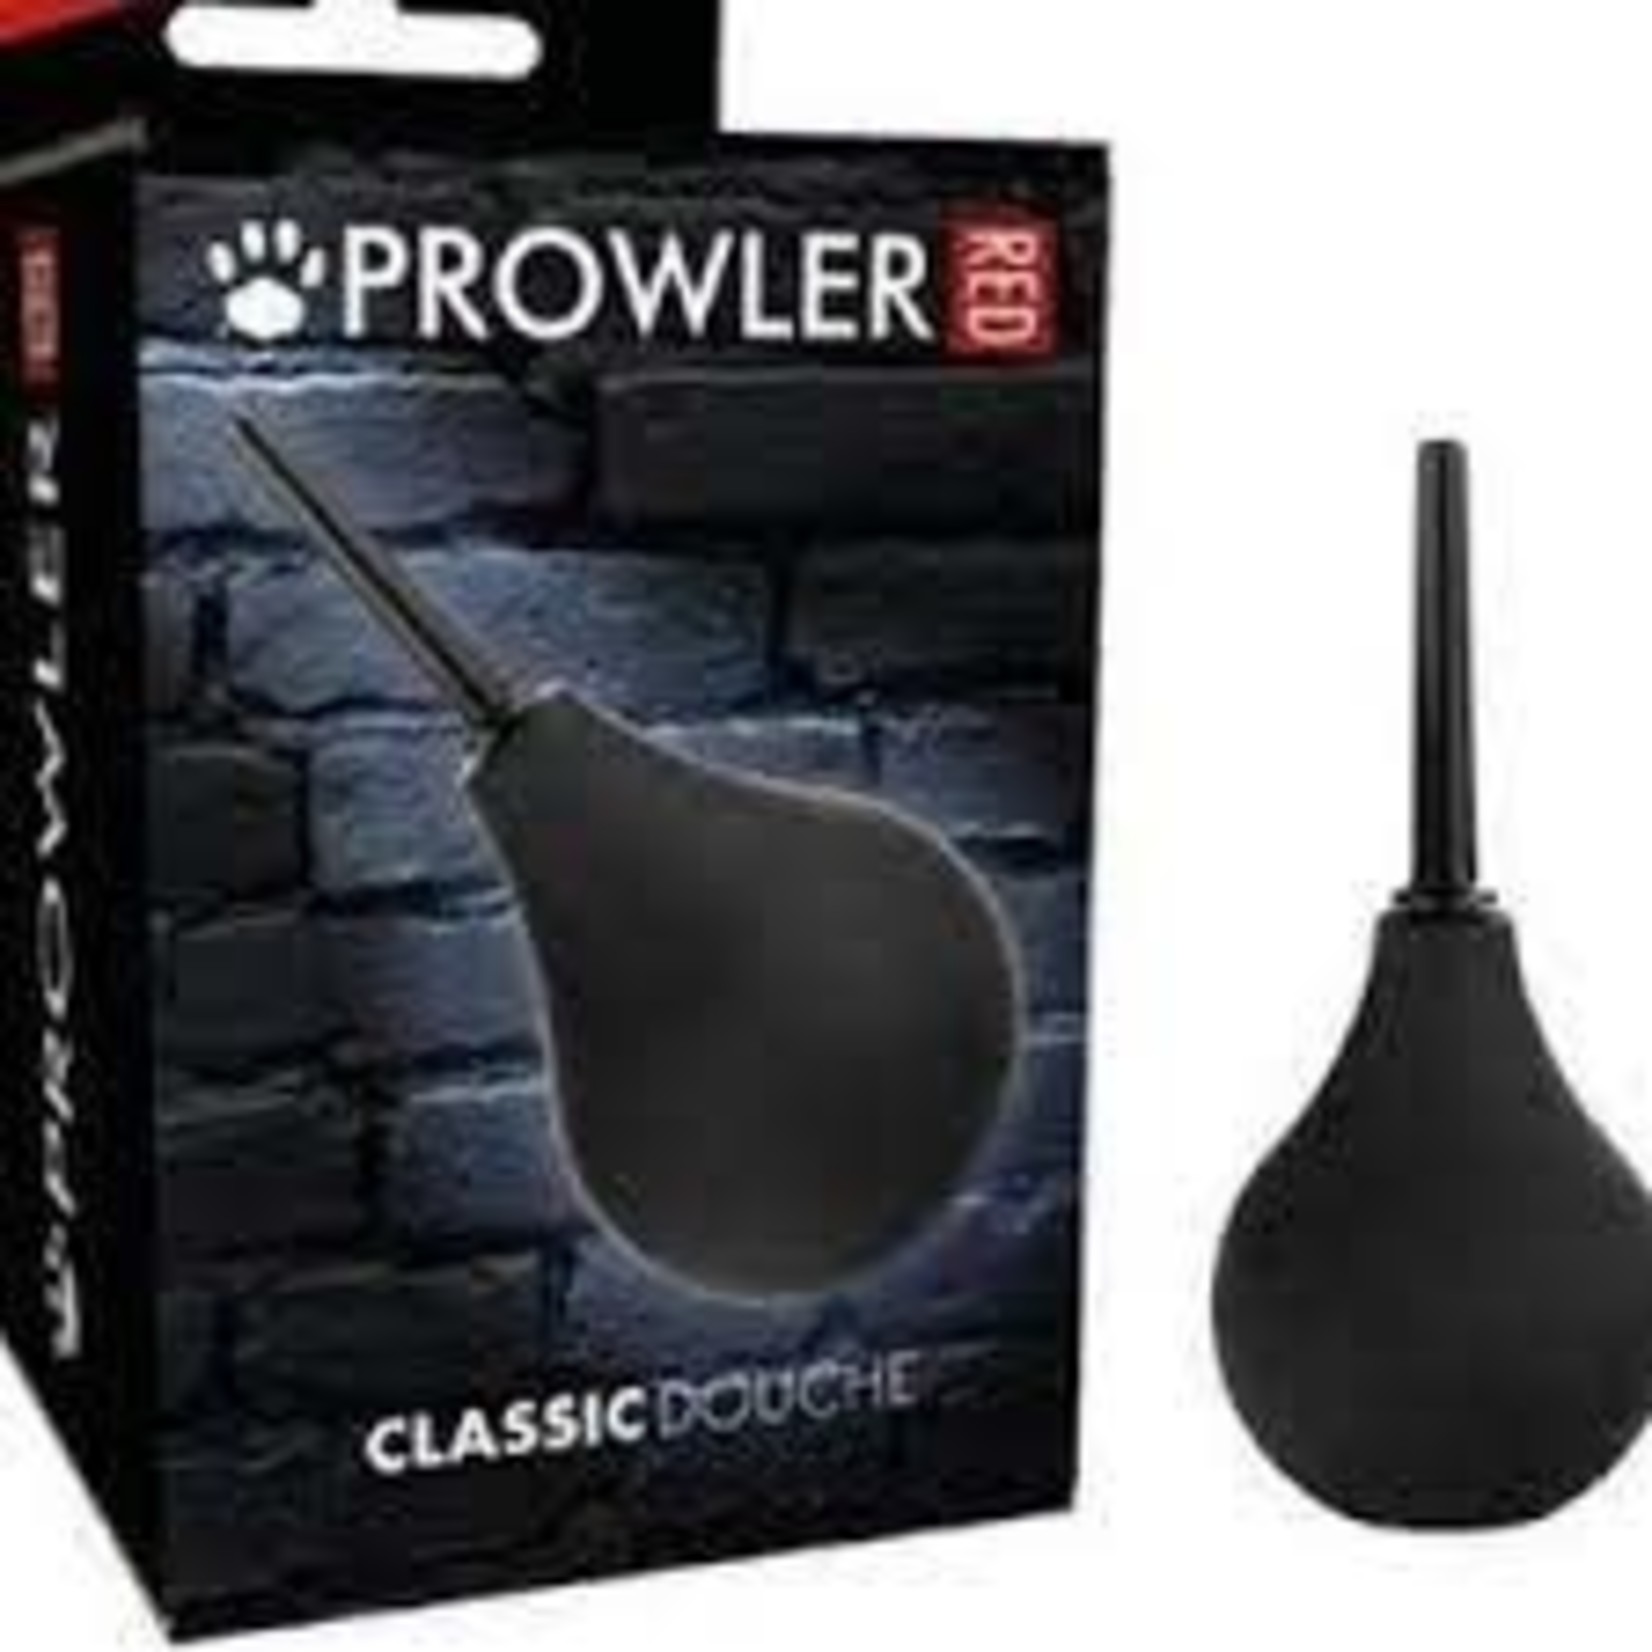 Prowler Prowler Red - Large Bulb Douche - Black